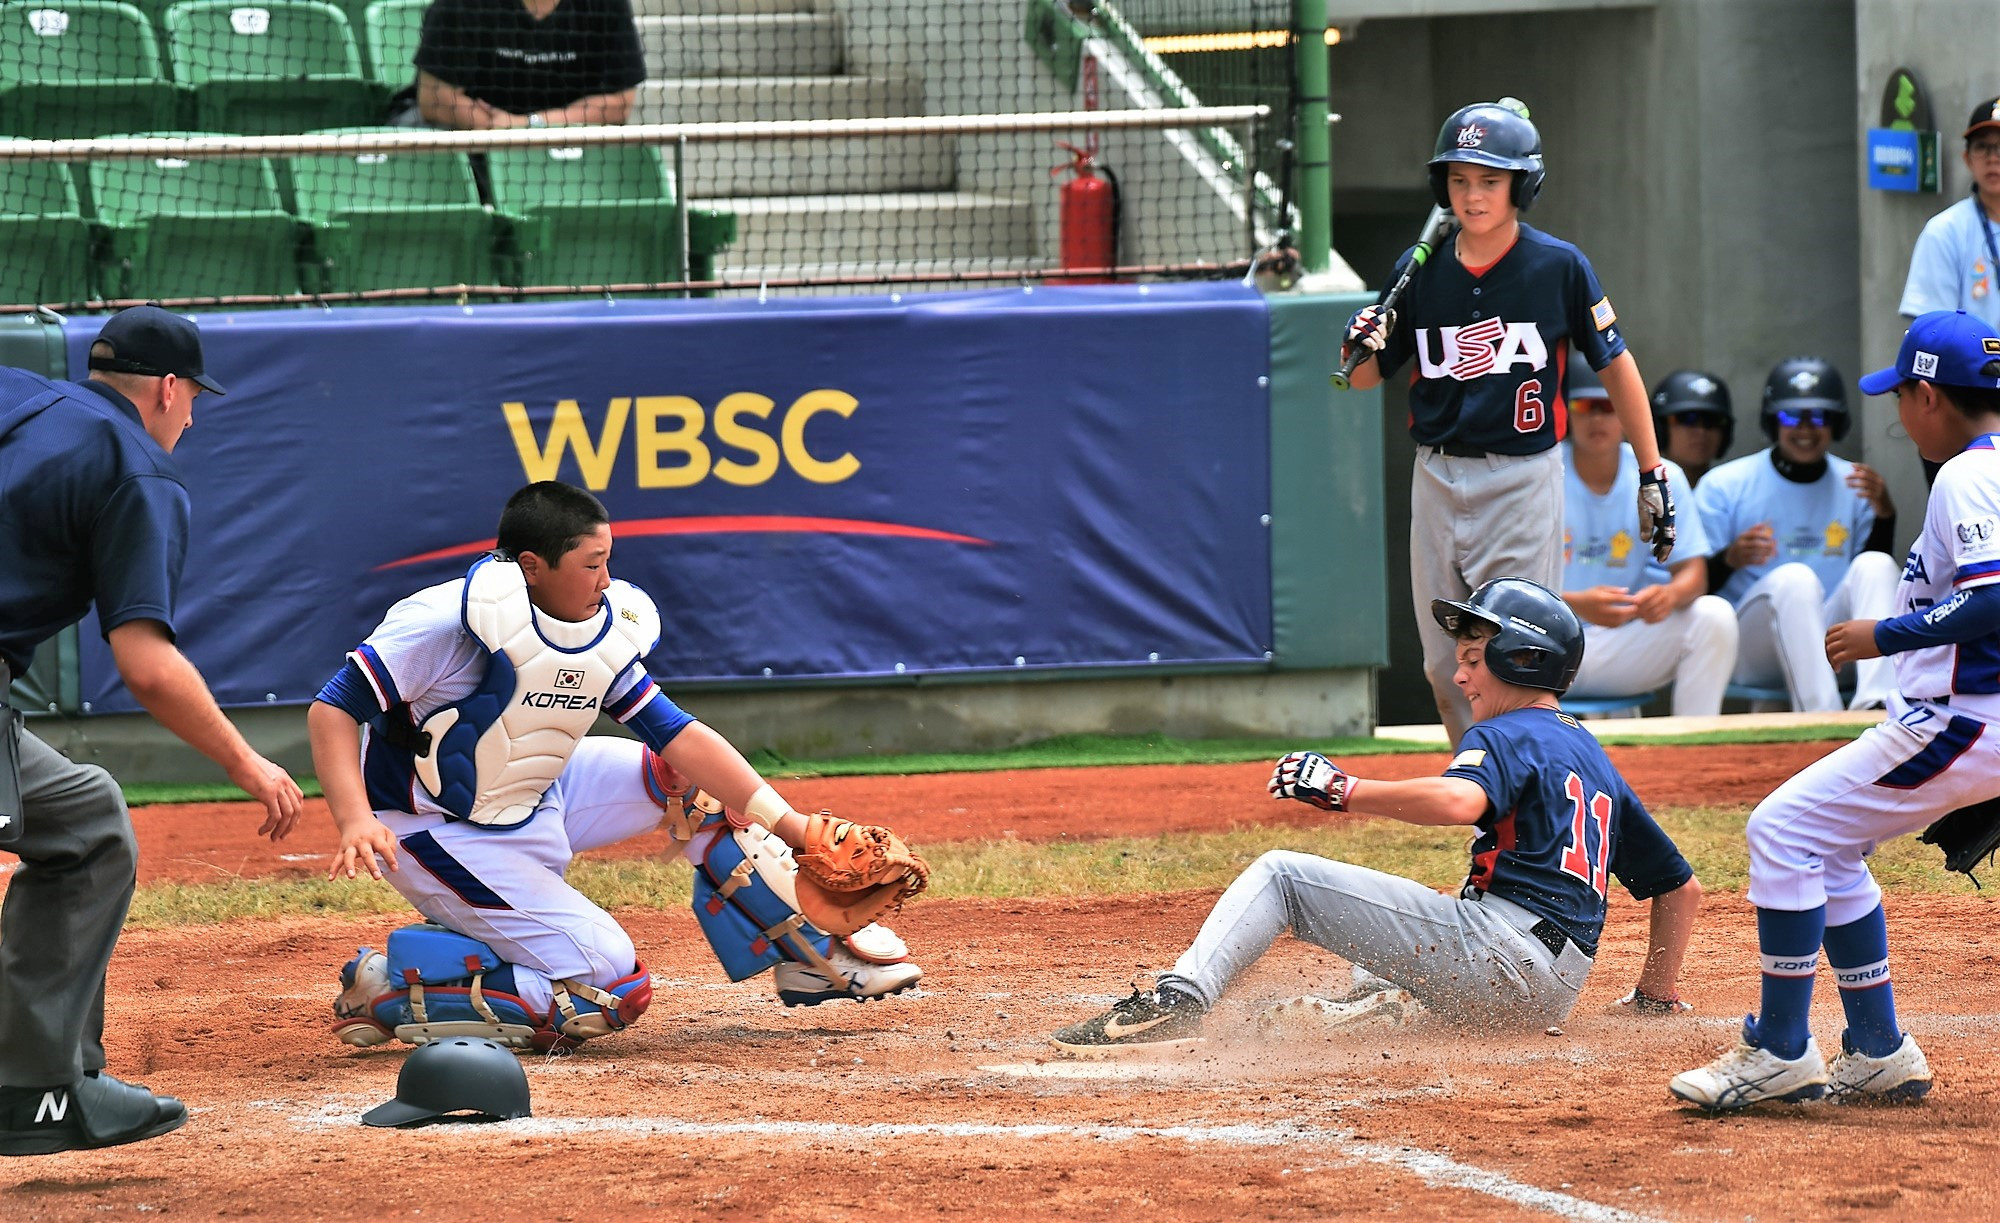 The US battled hard to claim victory ©WBSC